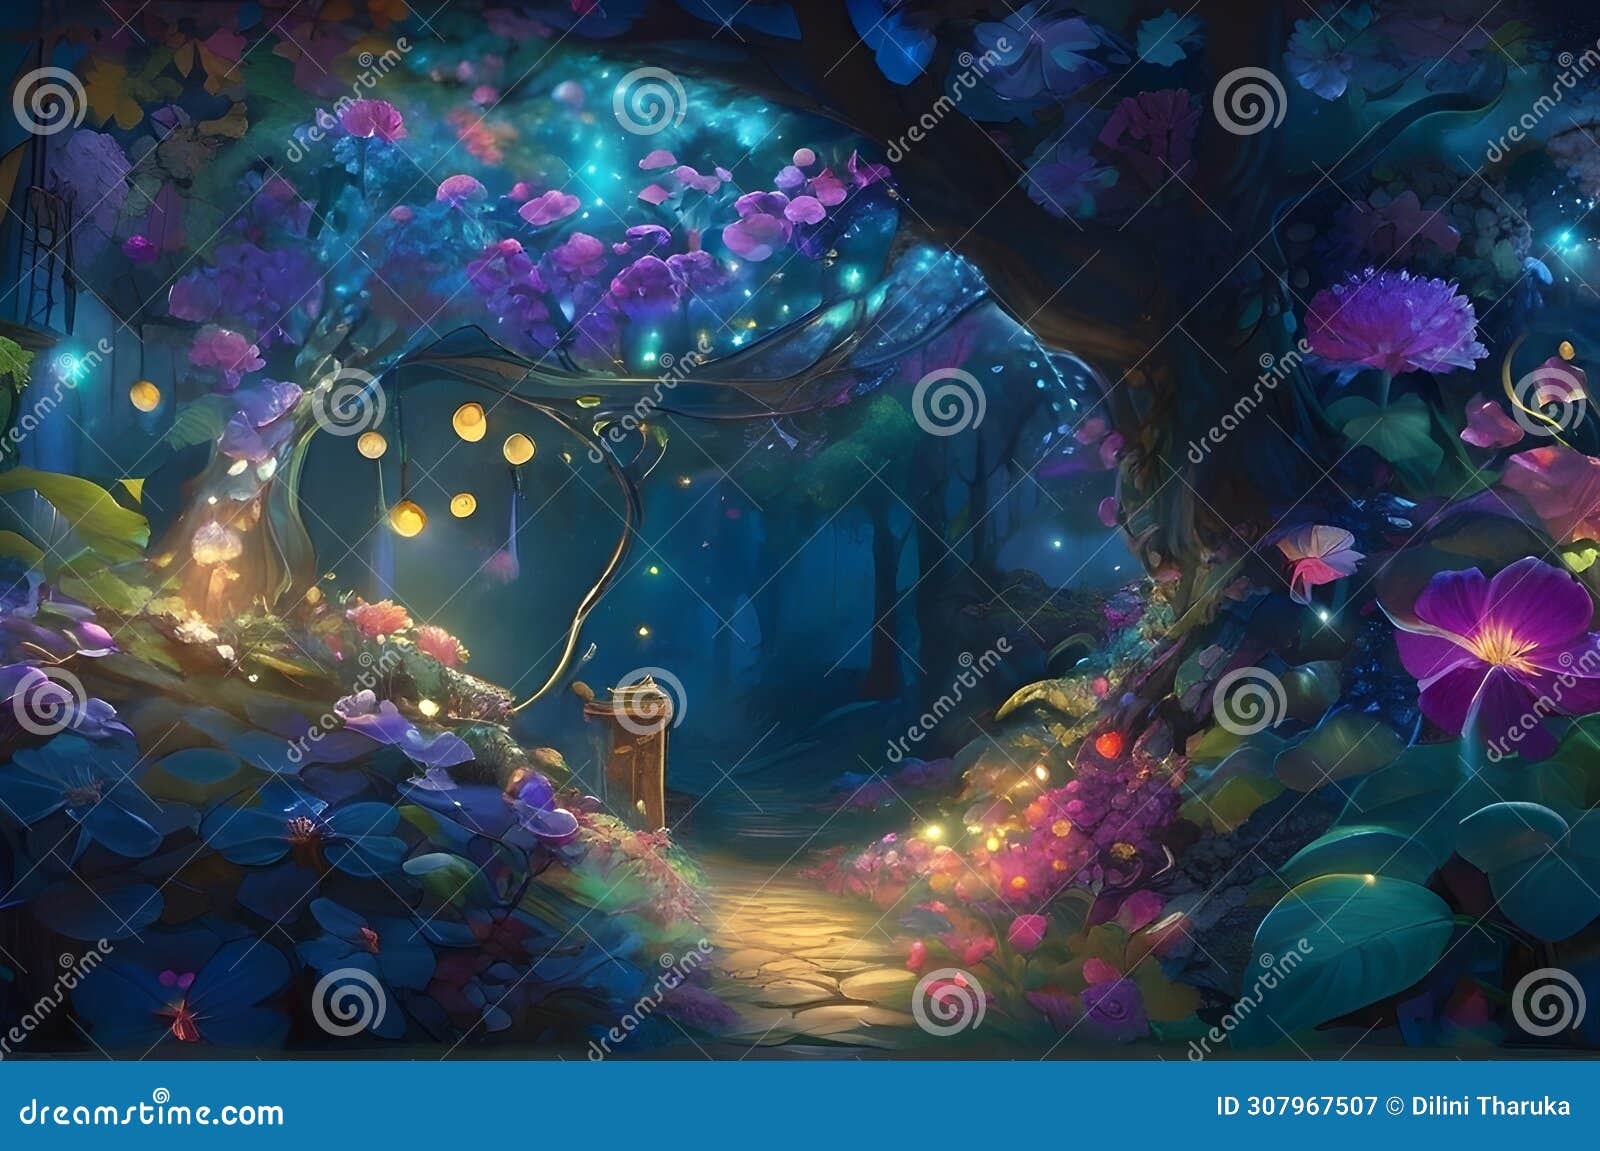 a radiant garden using glowing lights. employ a variety of colors to depict blooming flowers, twisting vines, and create a